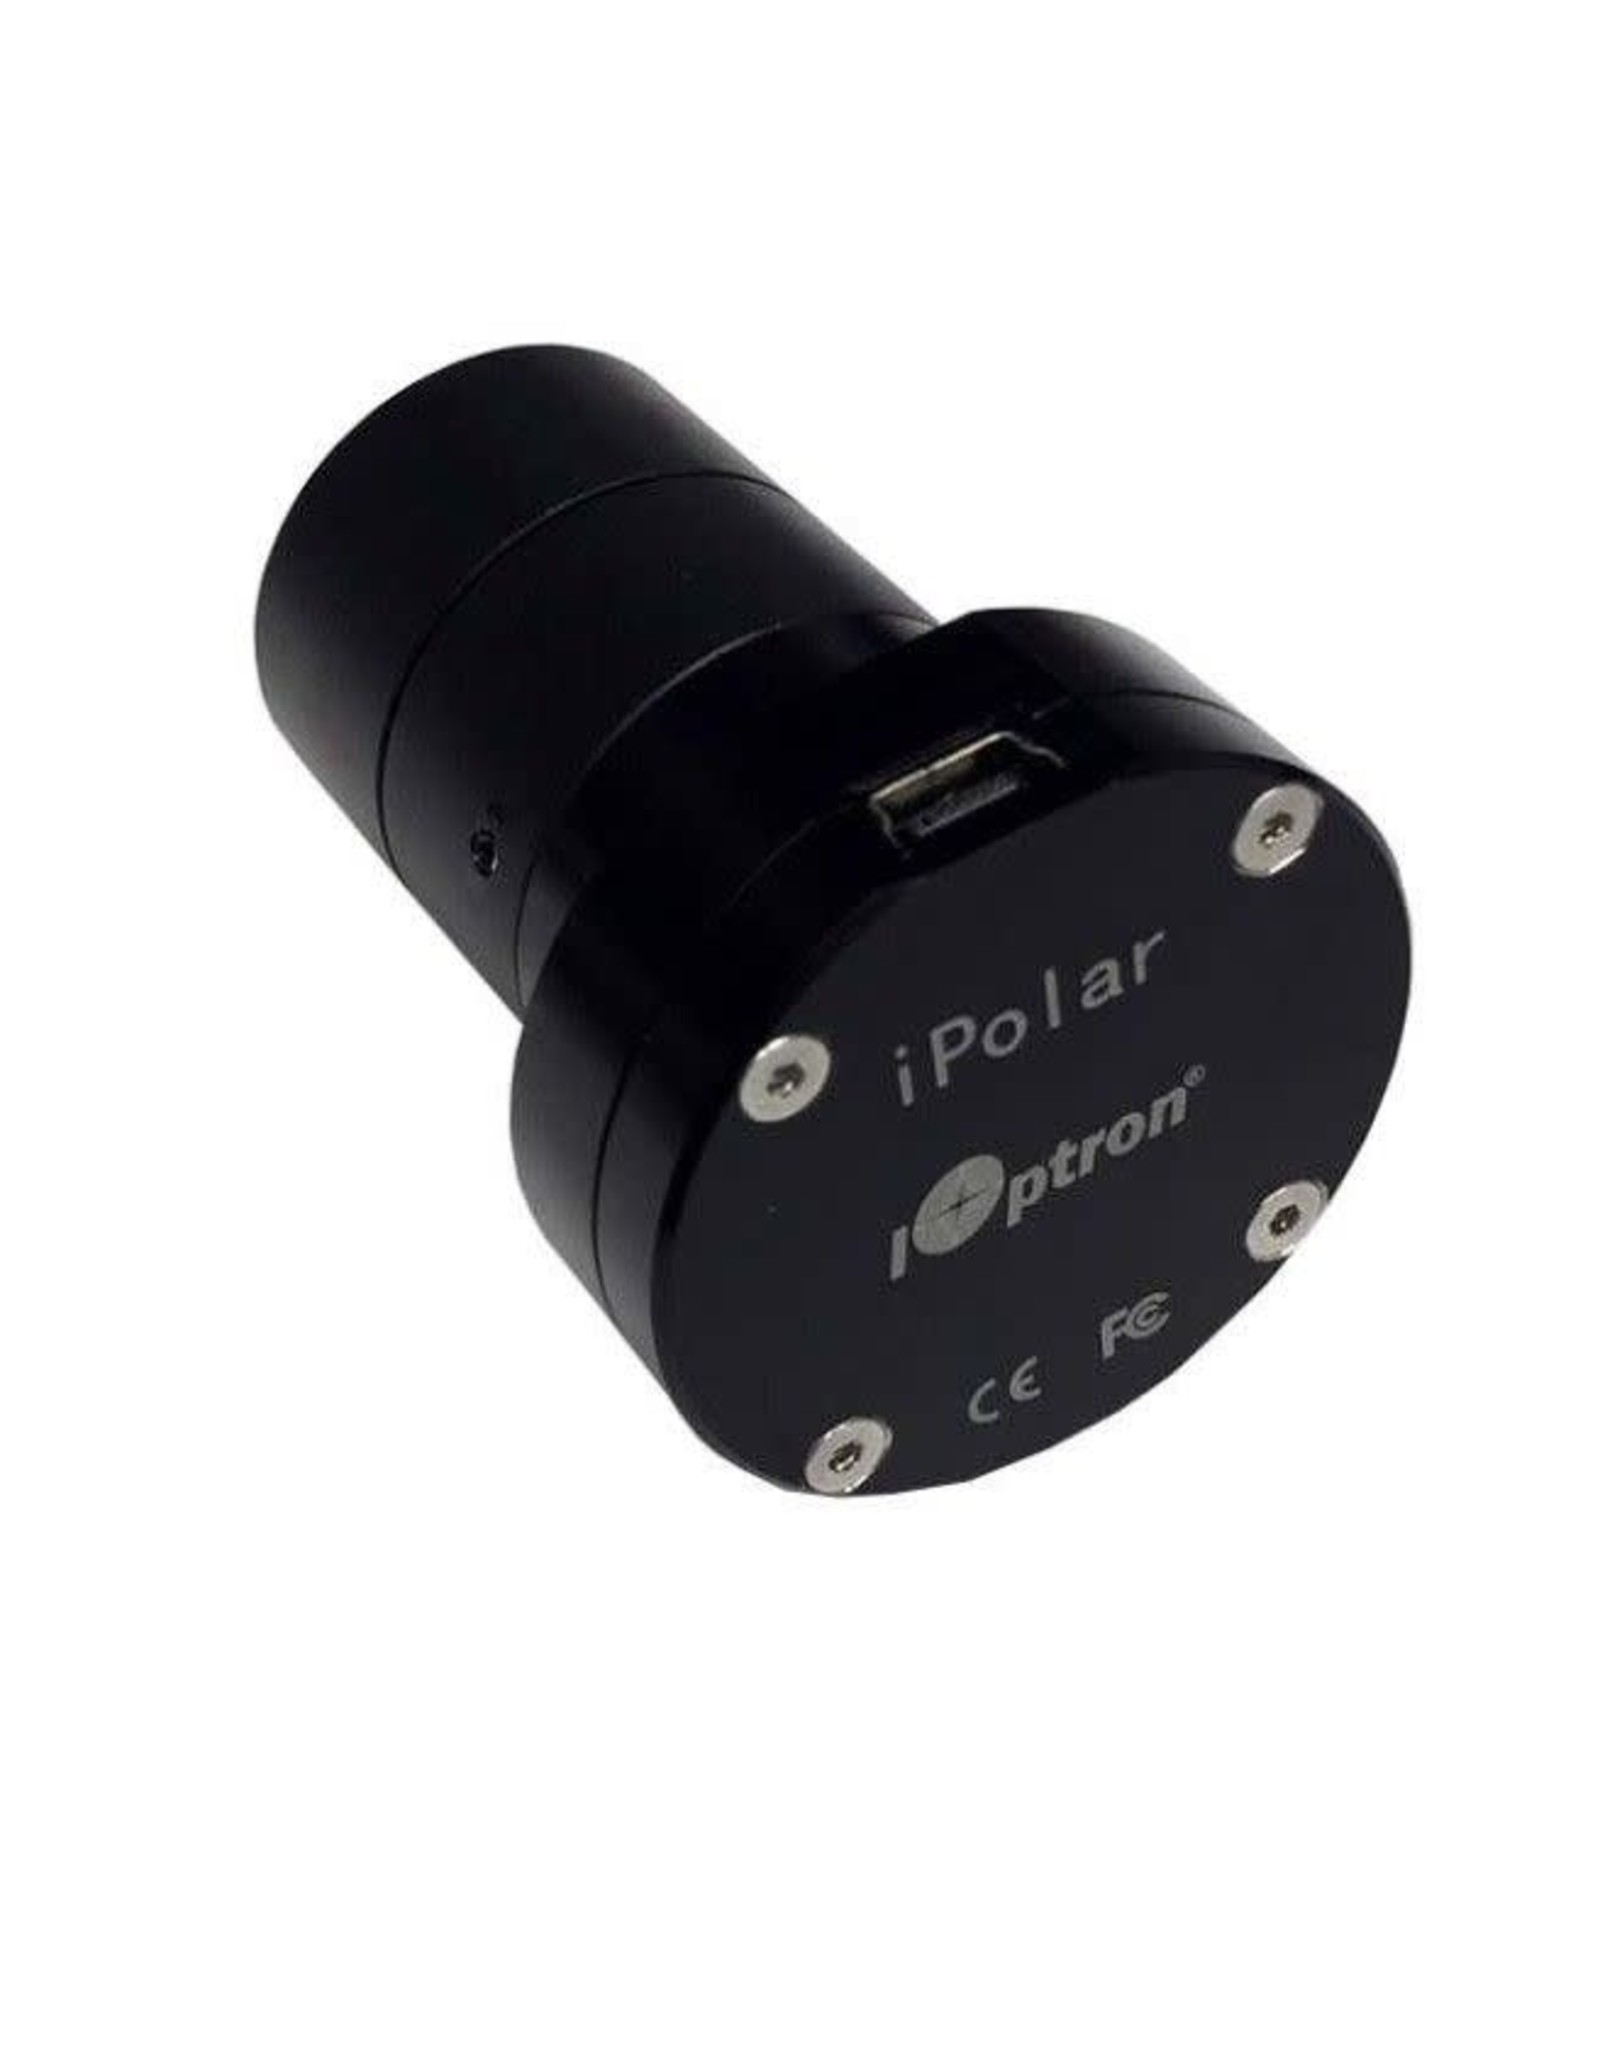 iOptron iOptron iPolar Electronic Polarscope with Adapter for External Mounting to ZEQ25 or CEM25 - 3339-025